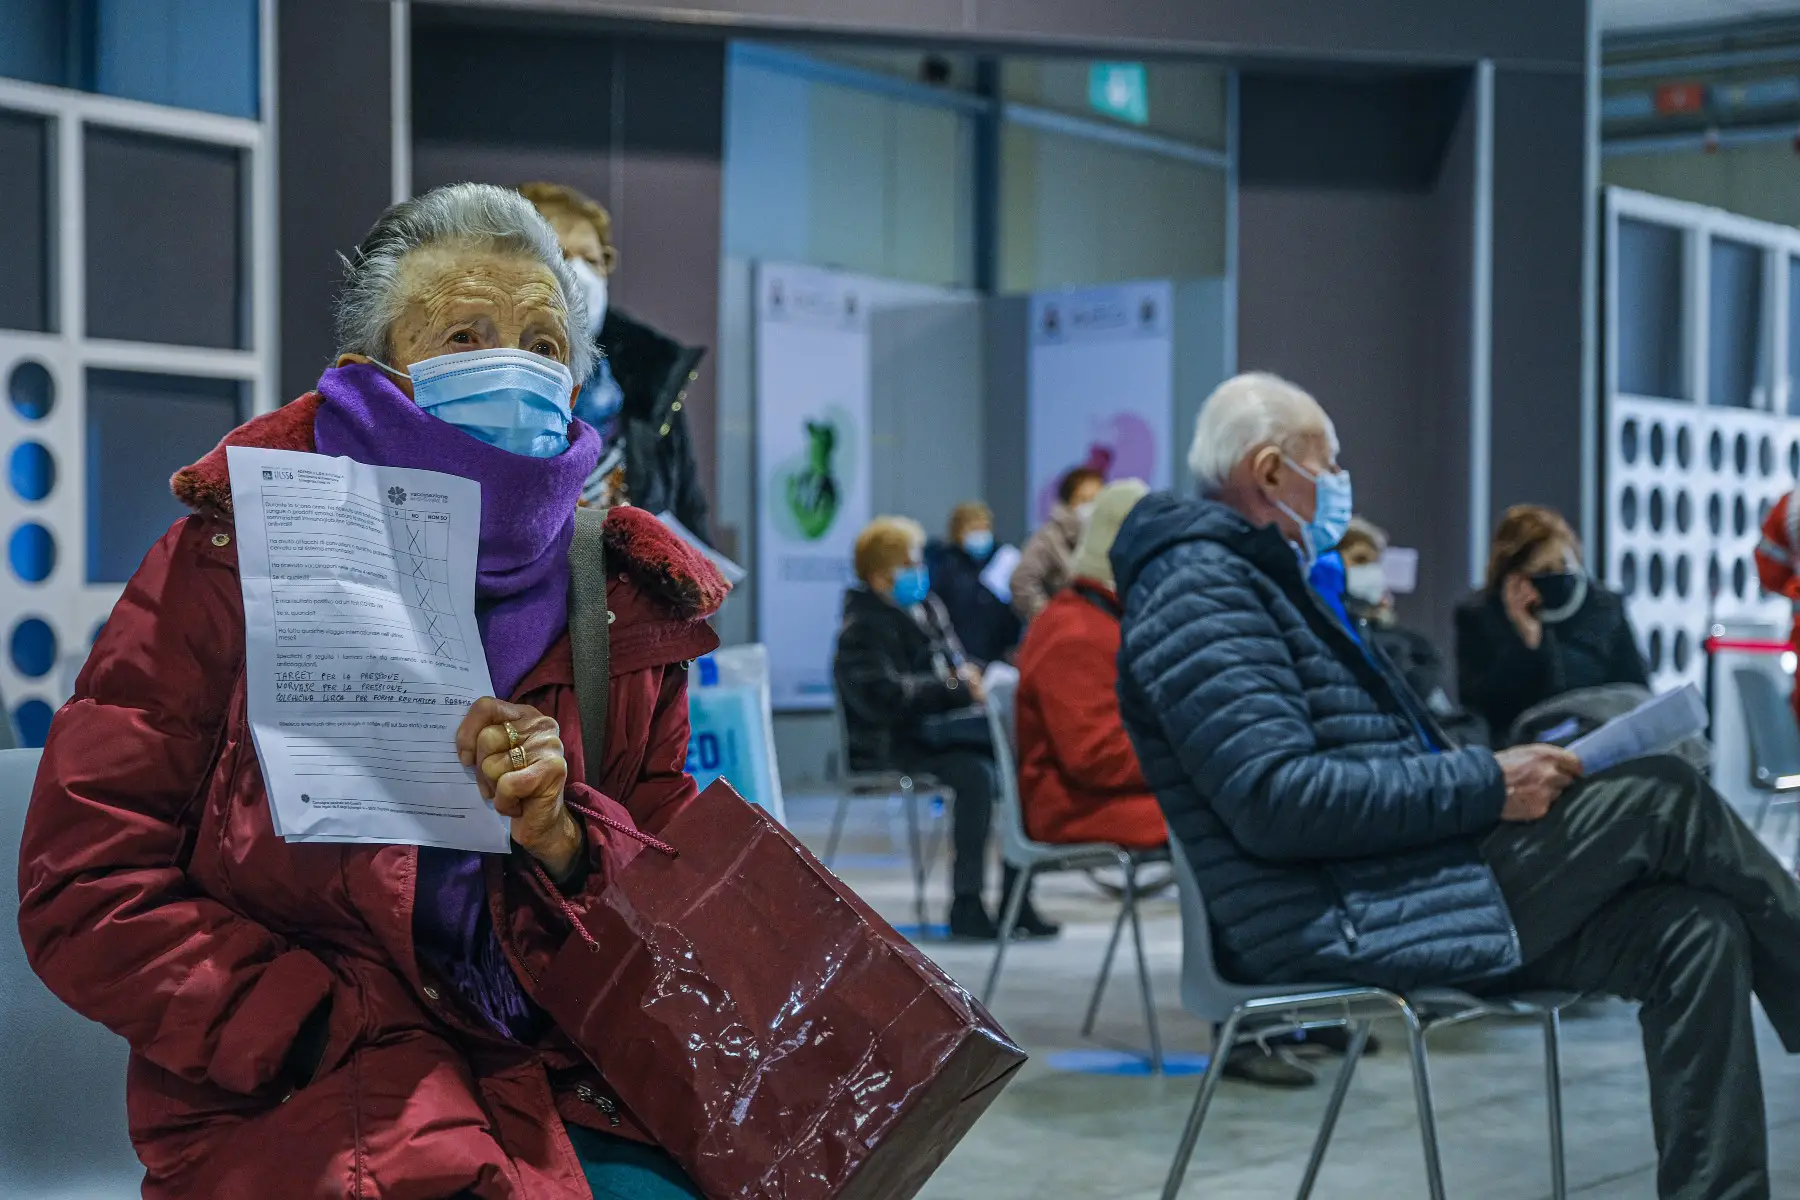 Mature adults waiting to get the COVID-19 vaccine in Padua, Italy. All are wearing protective face masks and are sitting three feet apart. An older woman is sitting in the foreground, hand clutching a filled out questionnaire.